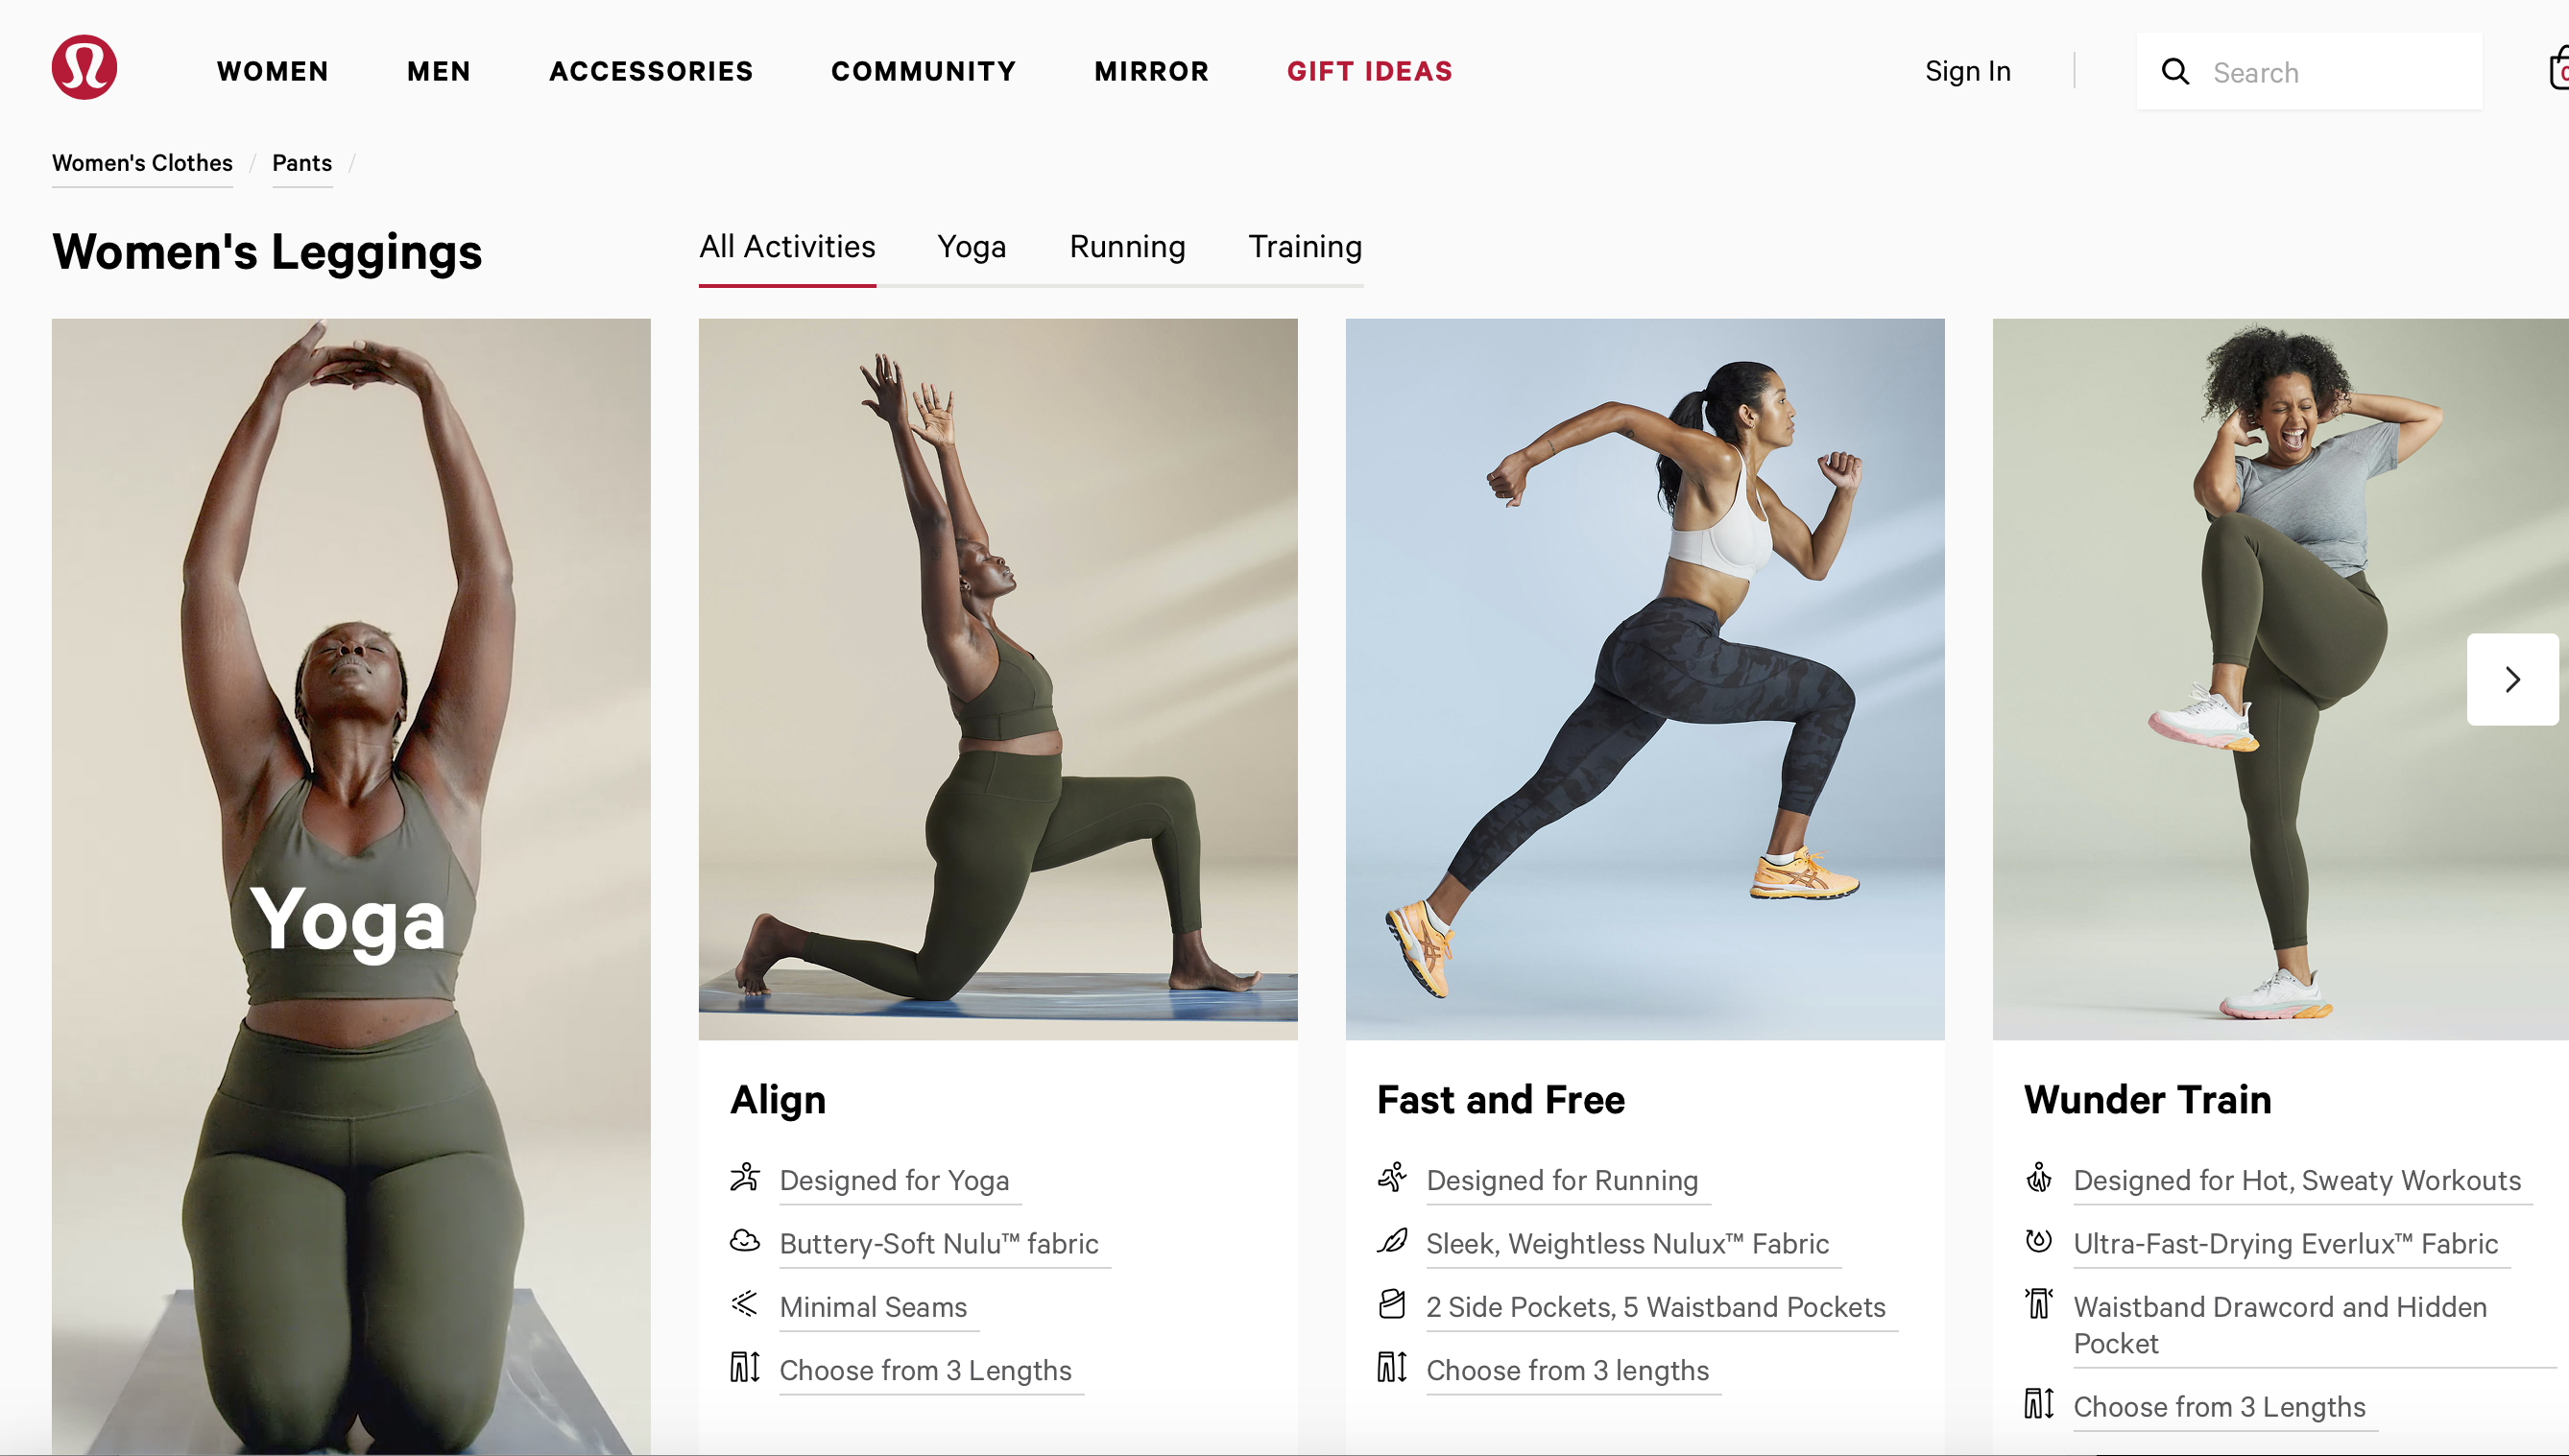 Lululemon Is Expanding Their Sizing & I Can't Wait To Finally Try